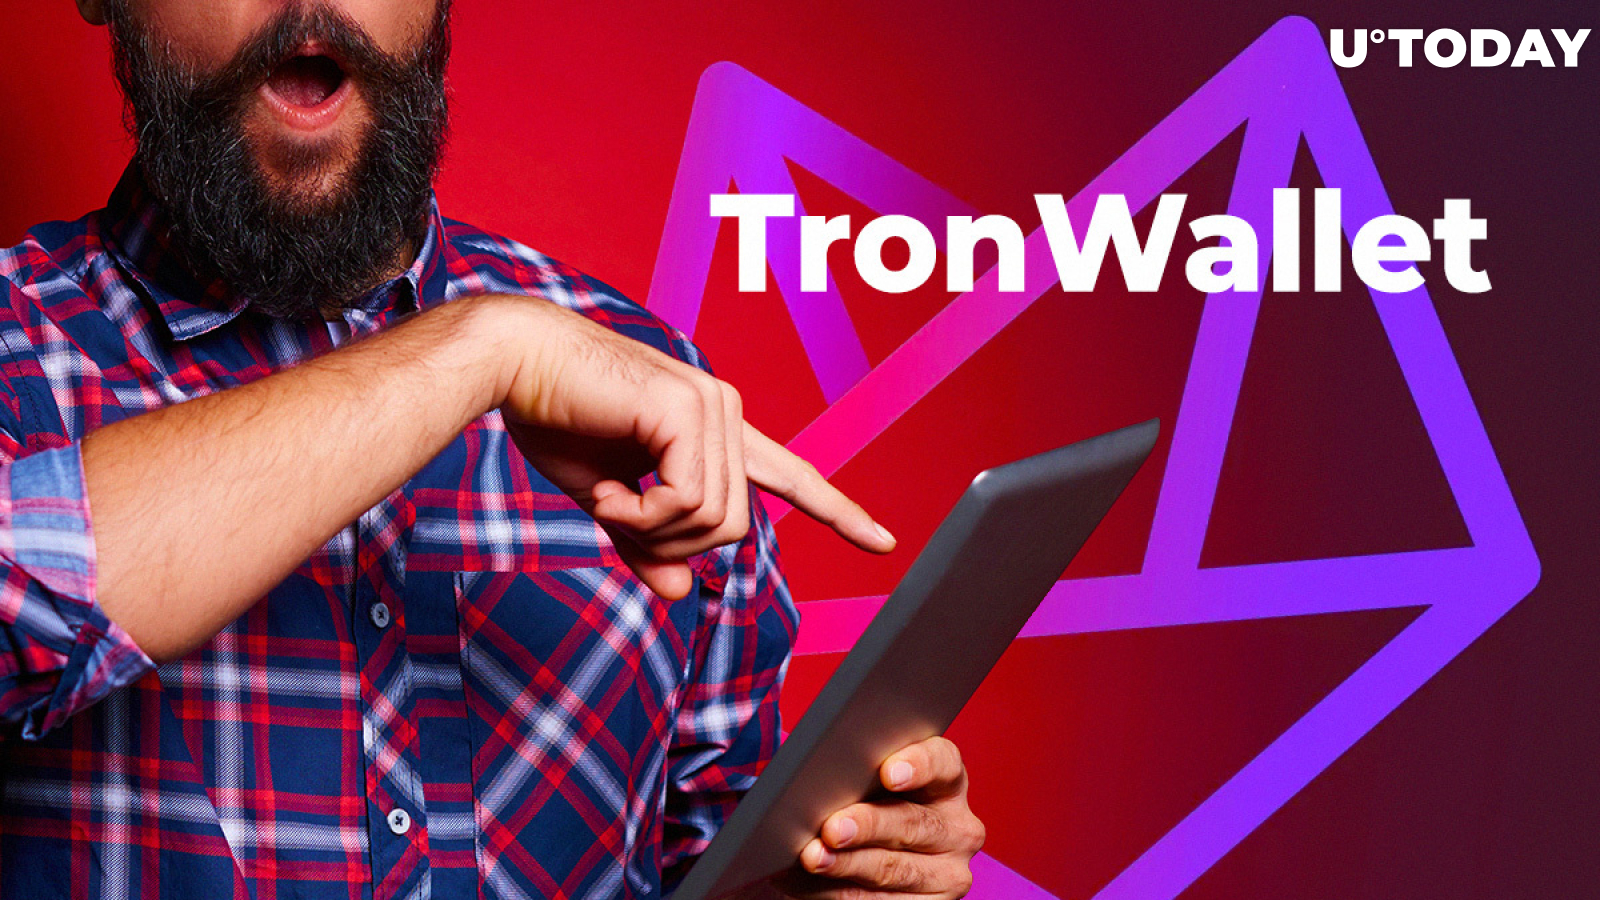 TronWallet Releases New Version with Some Exciting Features